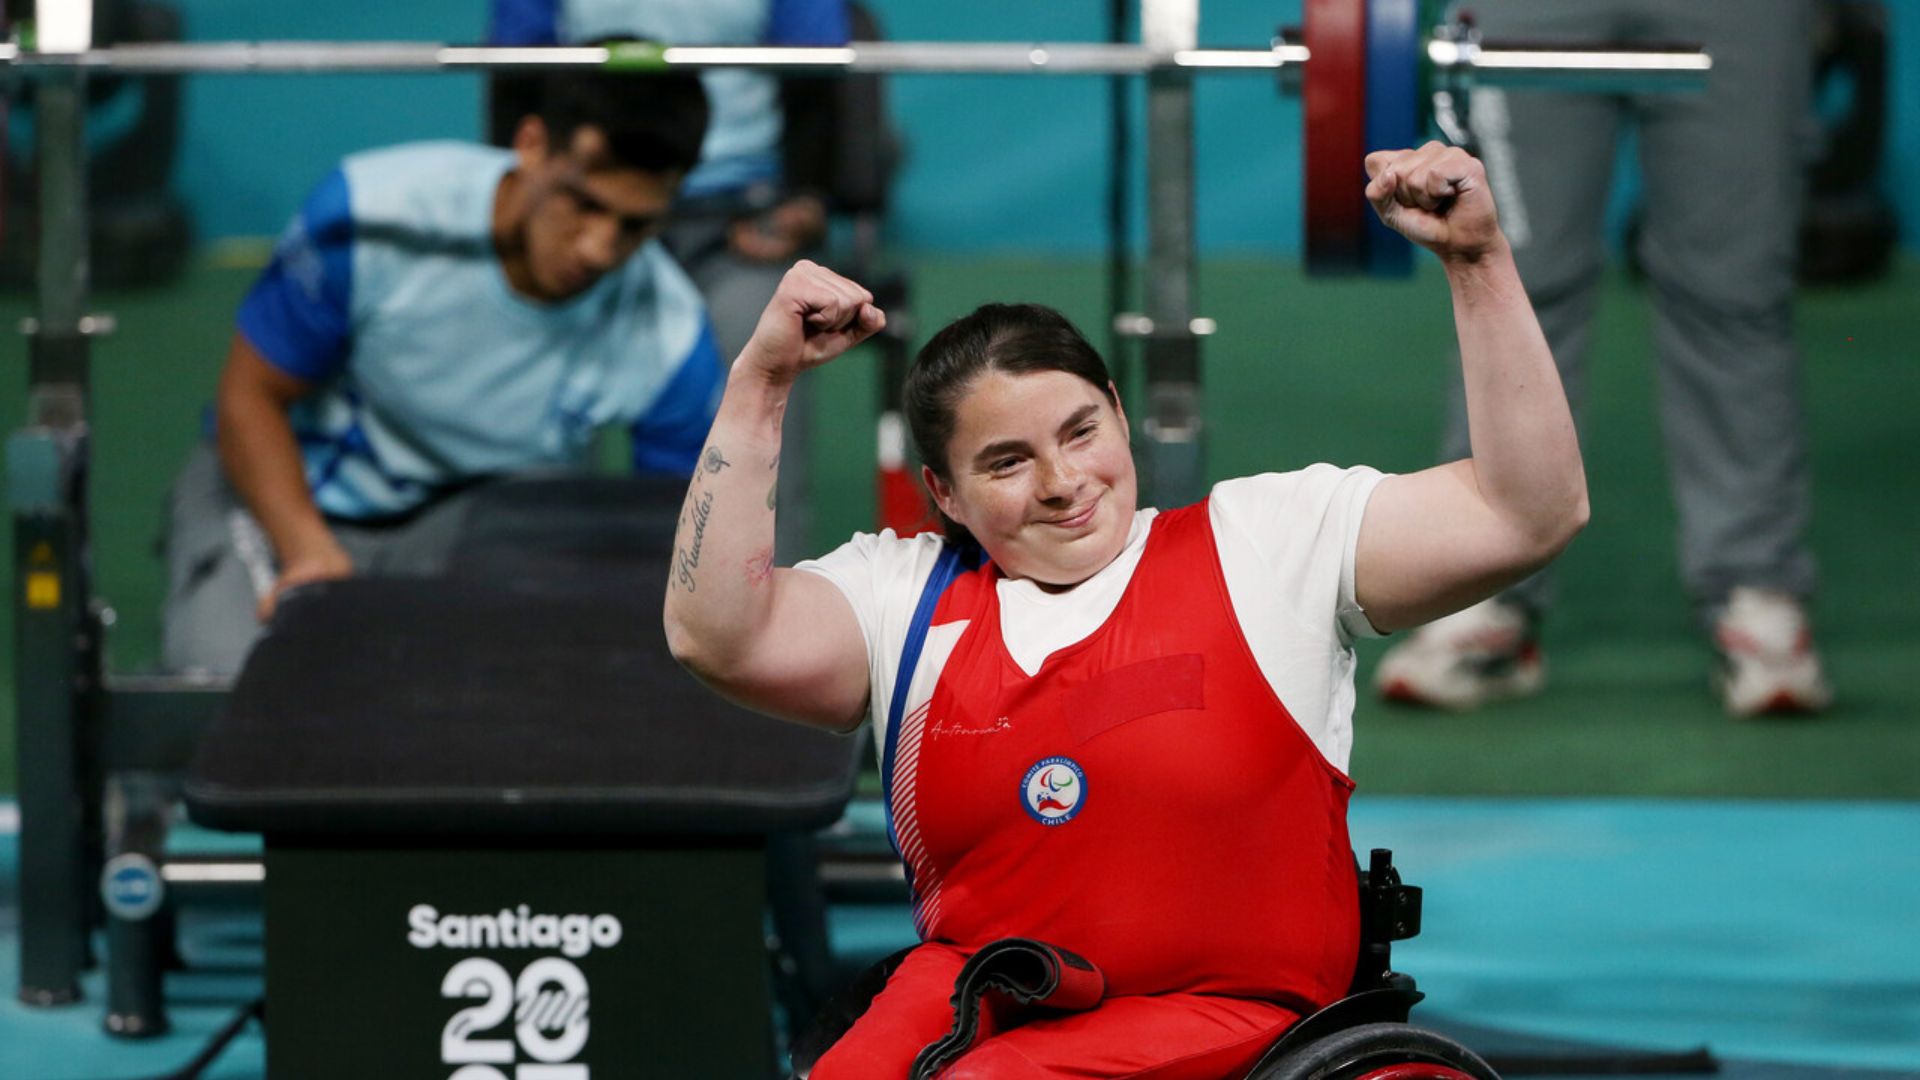 Thanks to Para Powerlifting, Chile Achieves its Best Performance